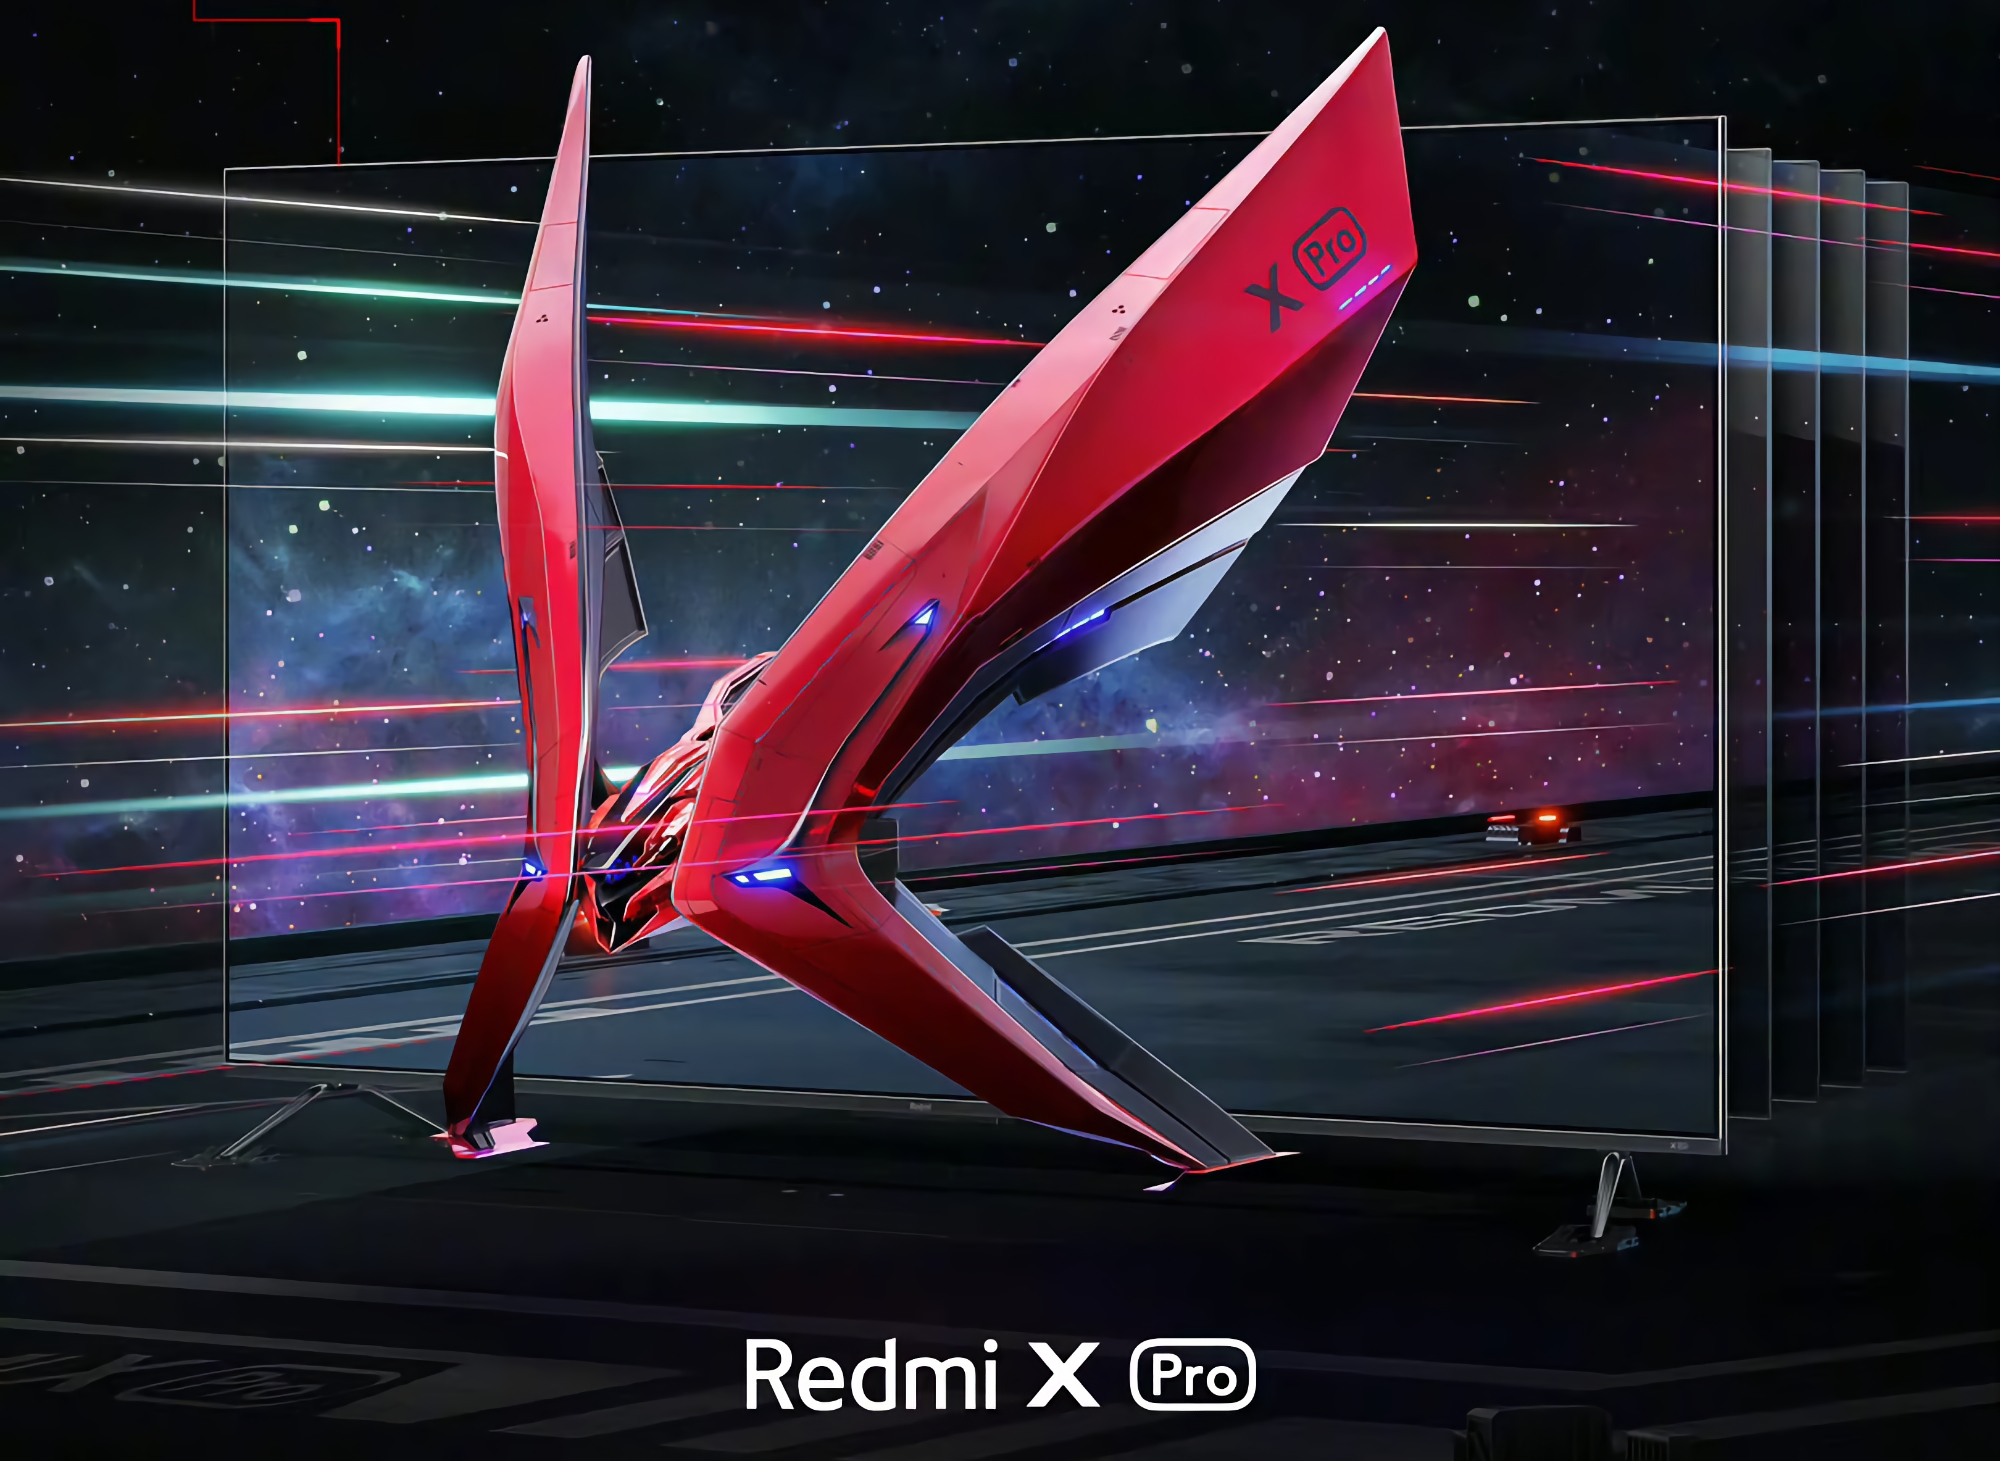 Redmi Gaming TV X Pro: a gaming line of 4K TVs with screens up to 75 inches, 120 Hz support and prices starting from $415